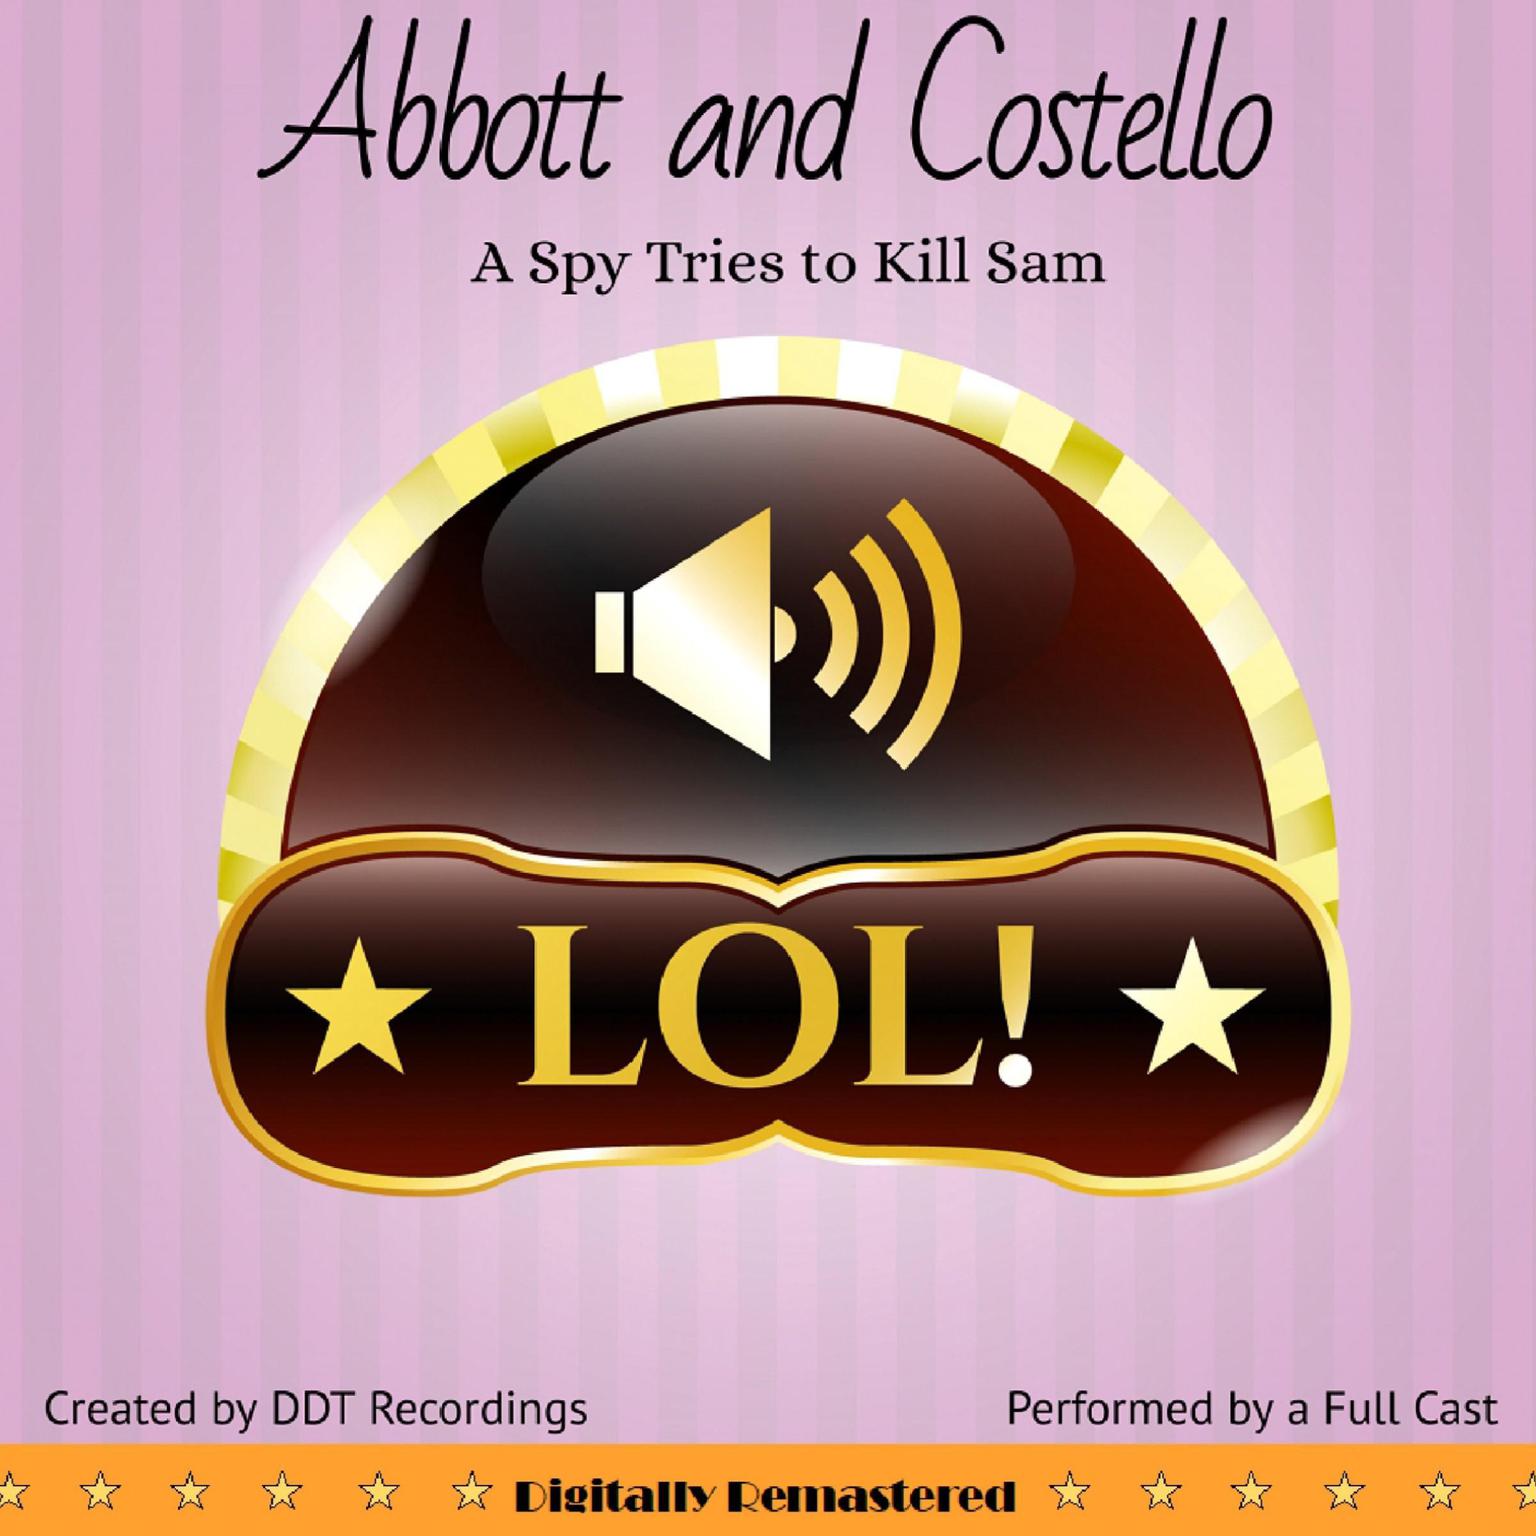 Abbott and Costello: The Spy Tries to Kill Sam Audiobook, by DDT Recordings